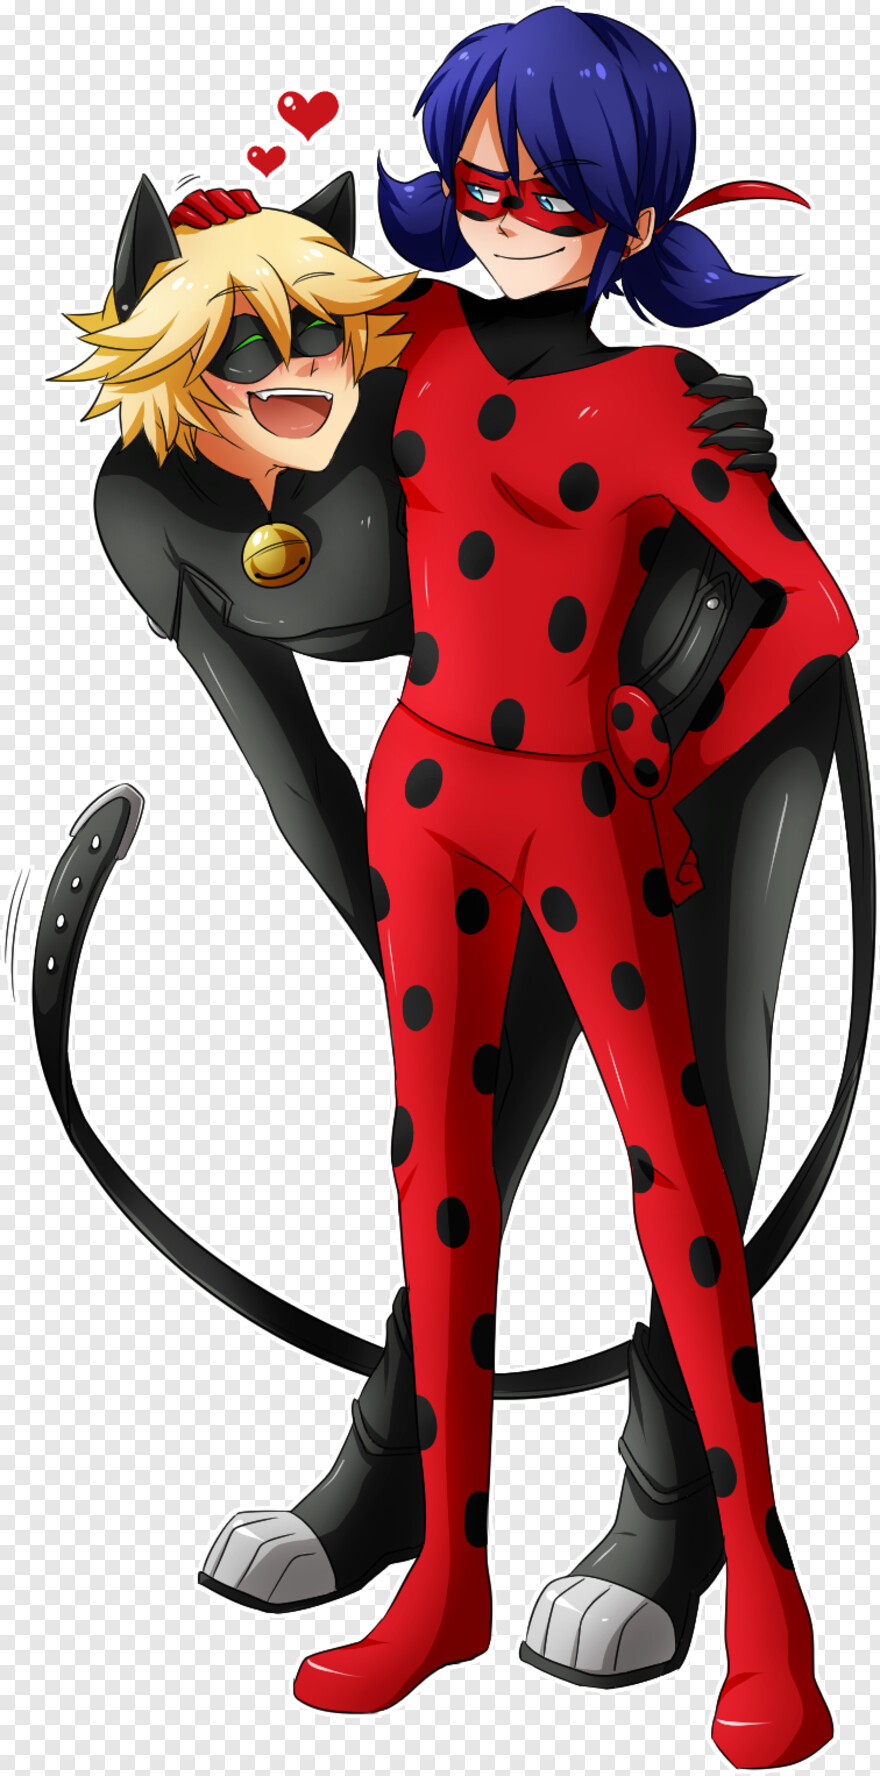 Roblox Character Free Icon Library - miraculous ladybug roblox